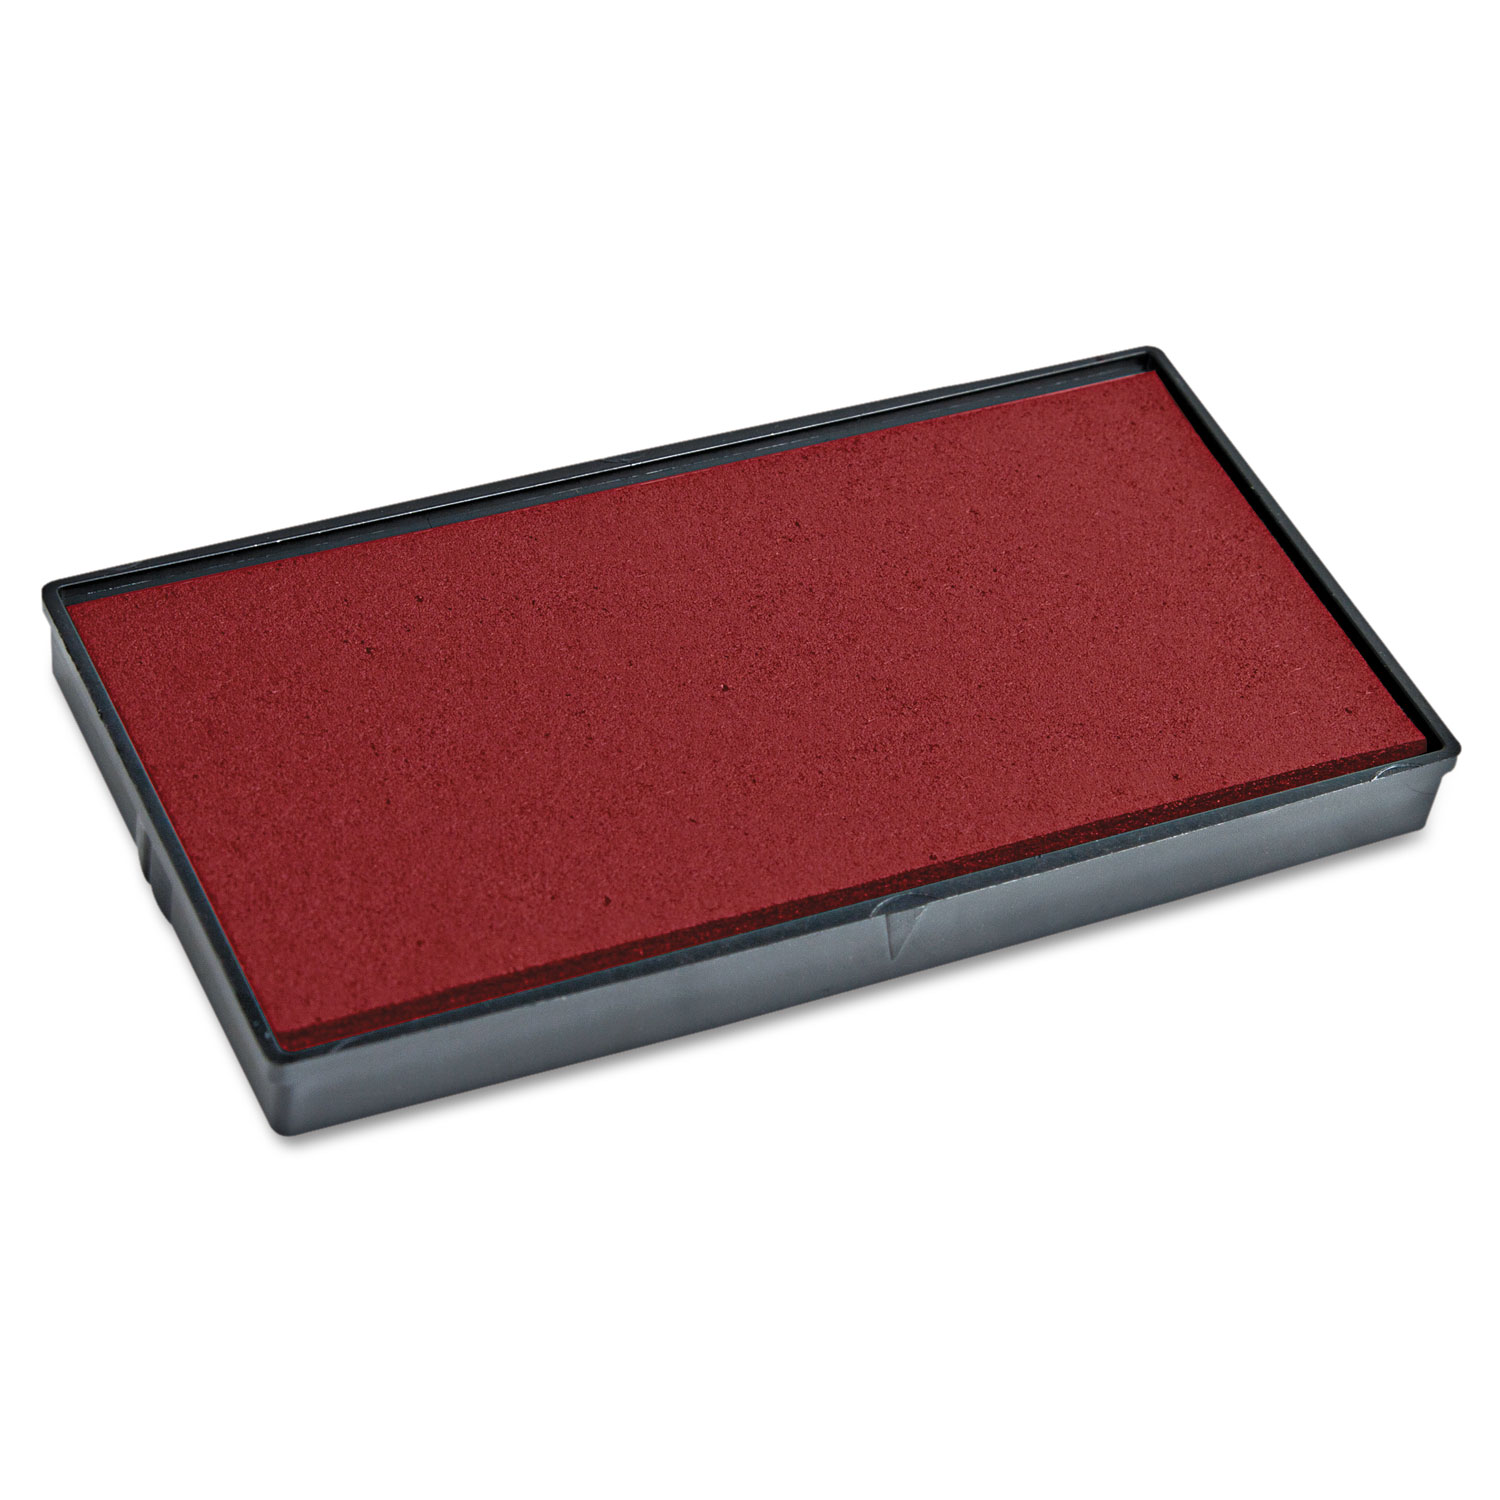  COSCO 2000PLUS 065479 Replacement Ink Pad for 2000PLUS 1SI50P, Red (COS065479) 